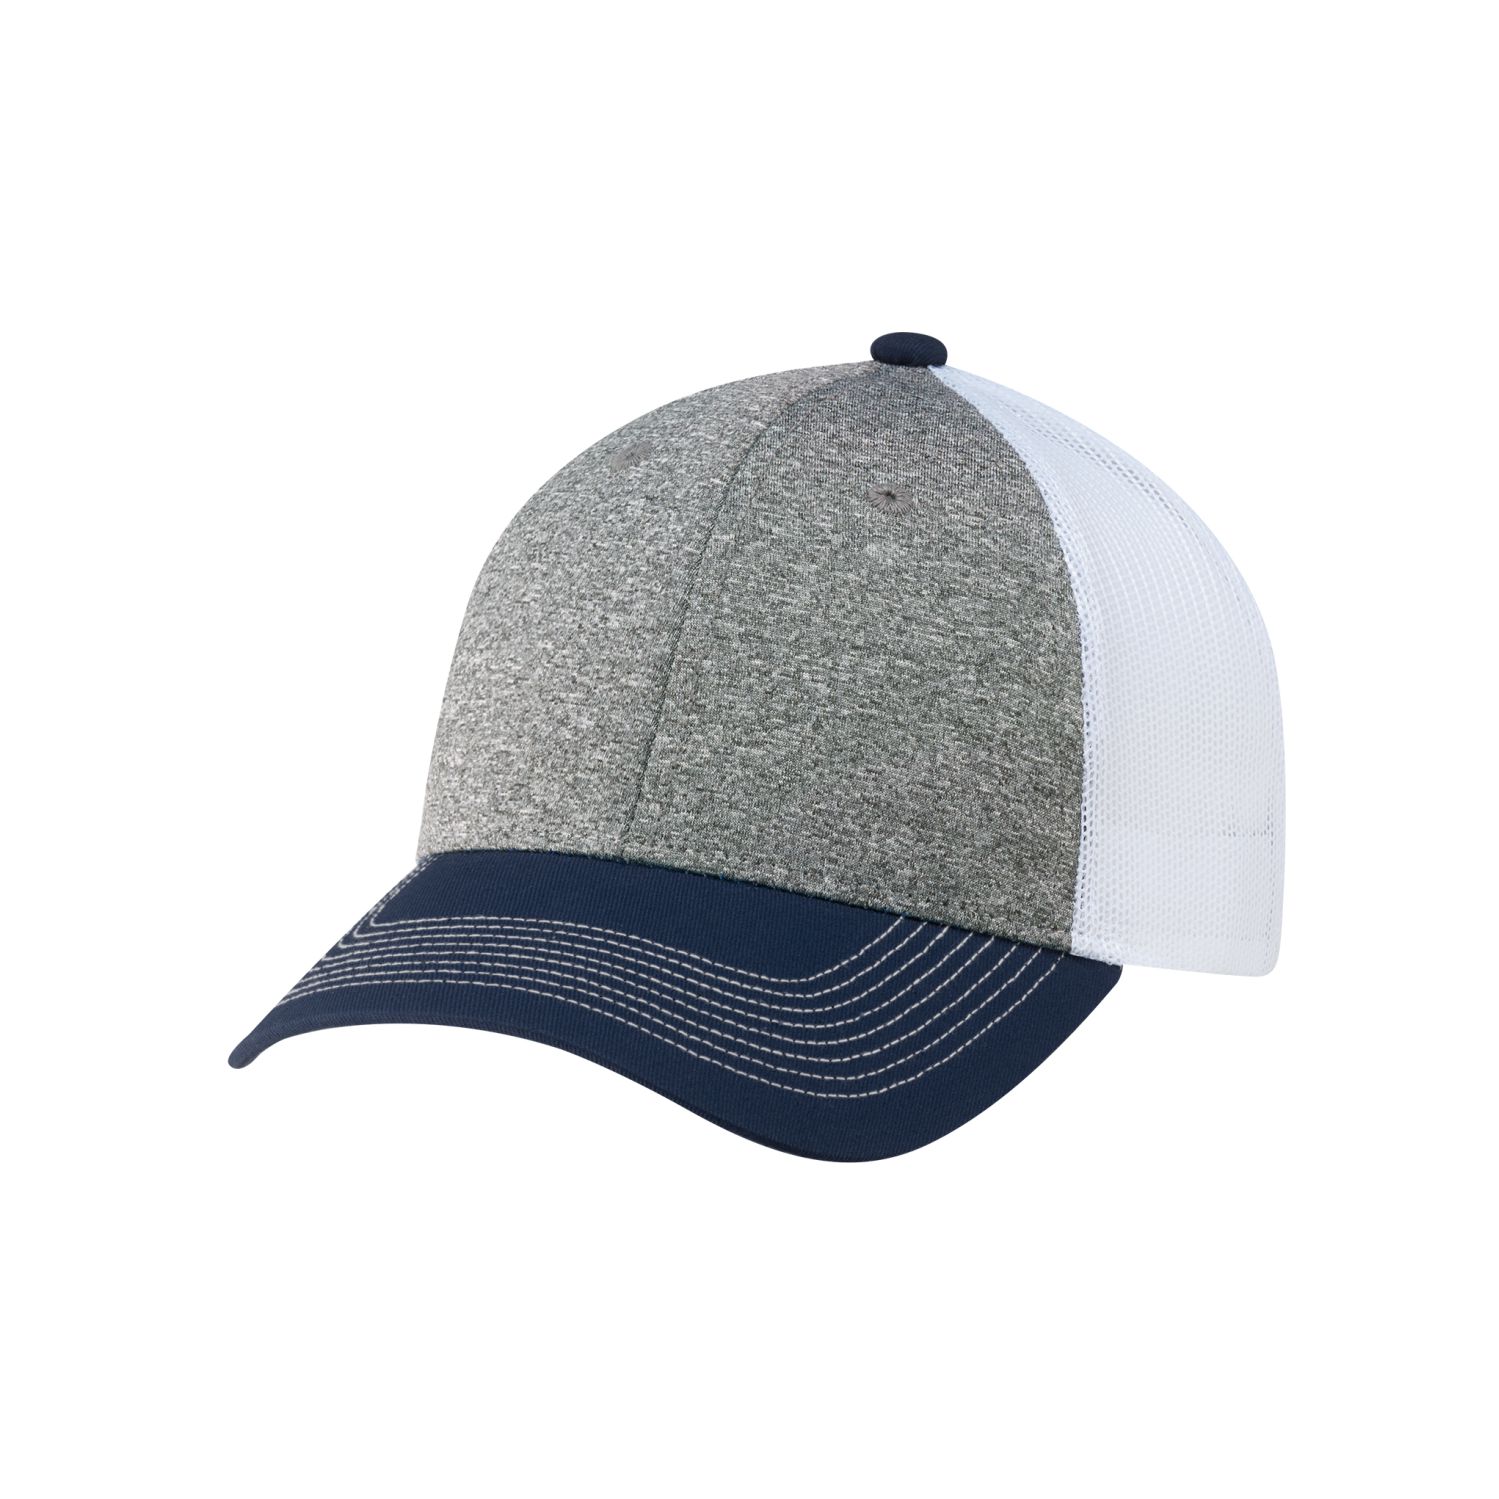 AJM Cotton Drill / Polyester Heather / Nylon Mesh 6 Panel Constructed Full-Fit Hat (Mesh Back) #4G645M Navy / Charcoal / White